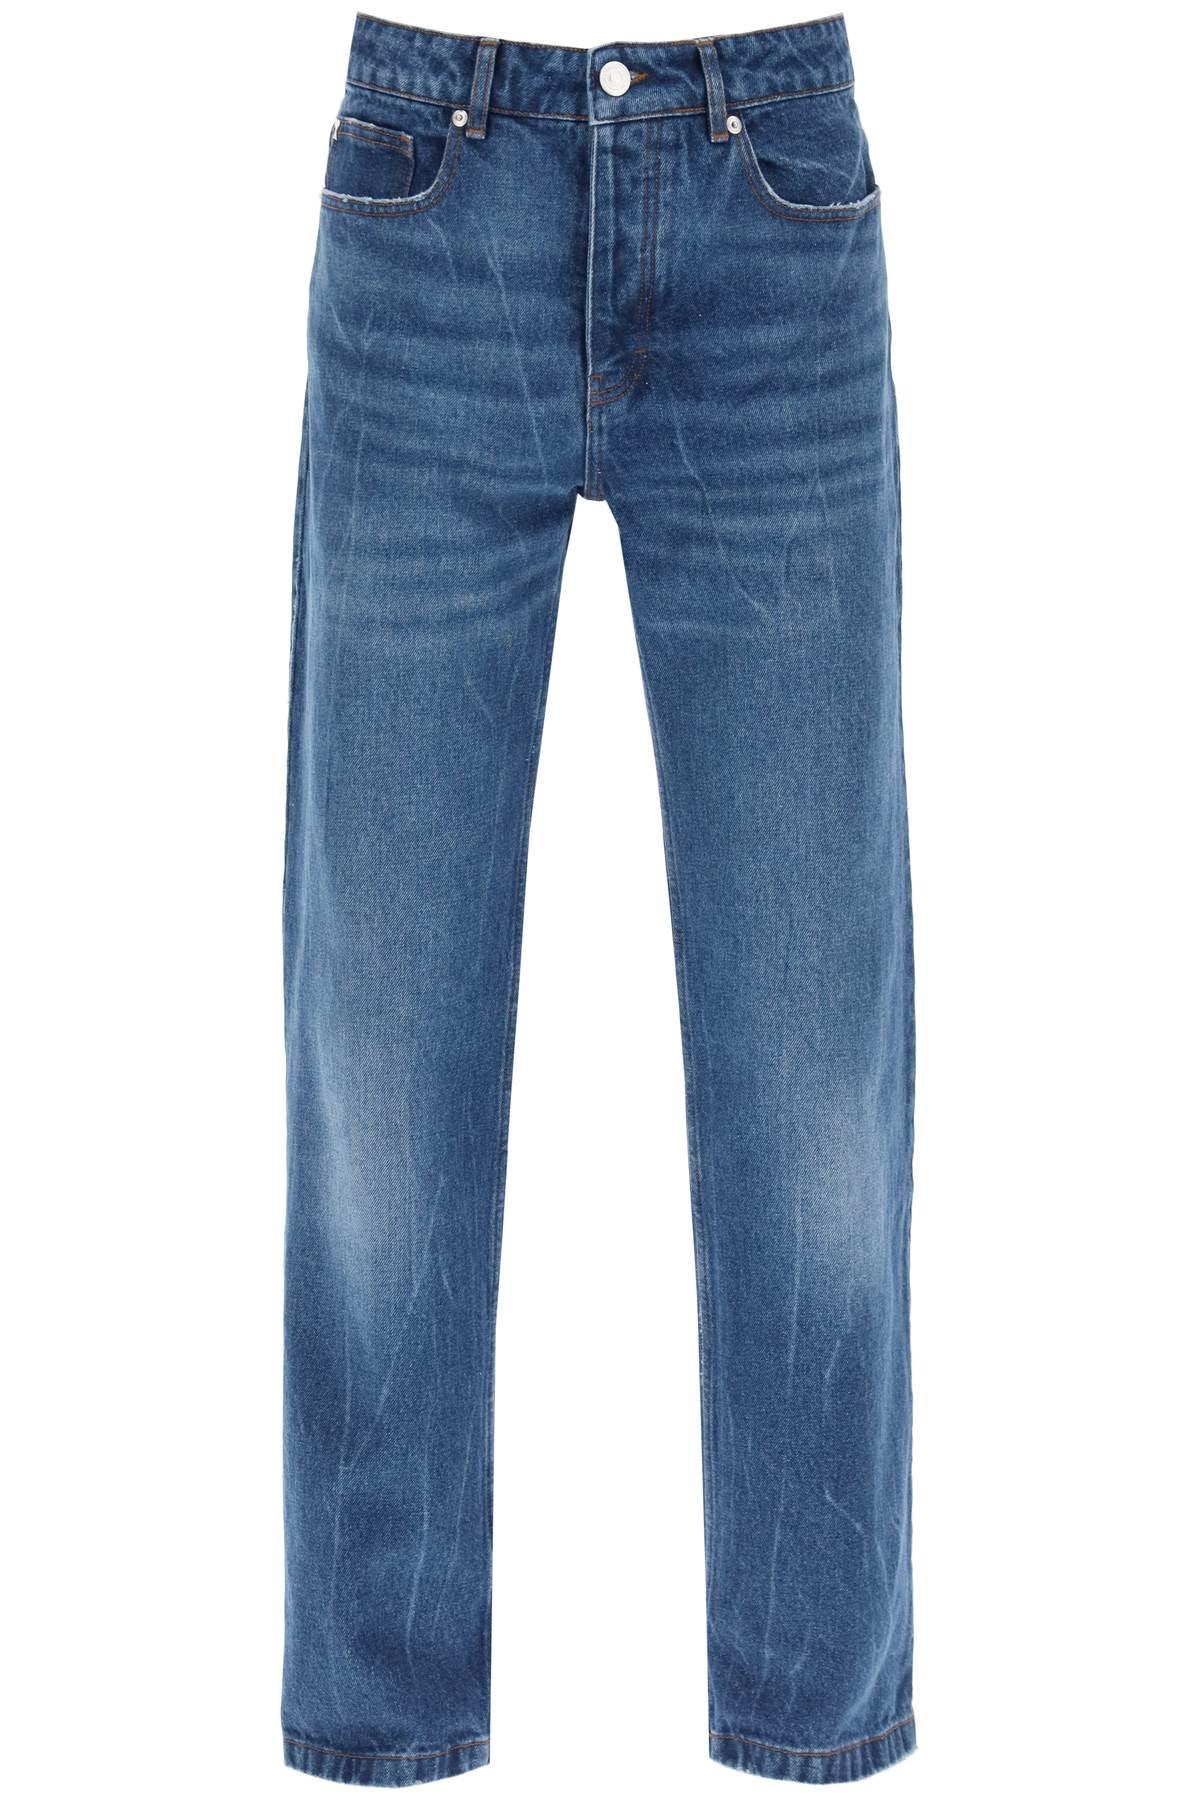 Ami paris loose jeans with straight cut-0